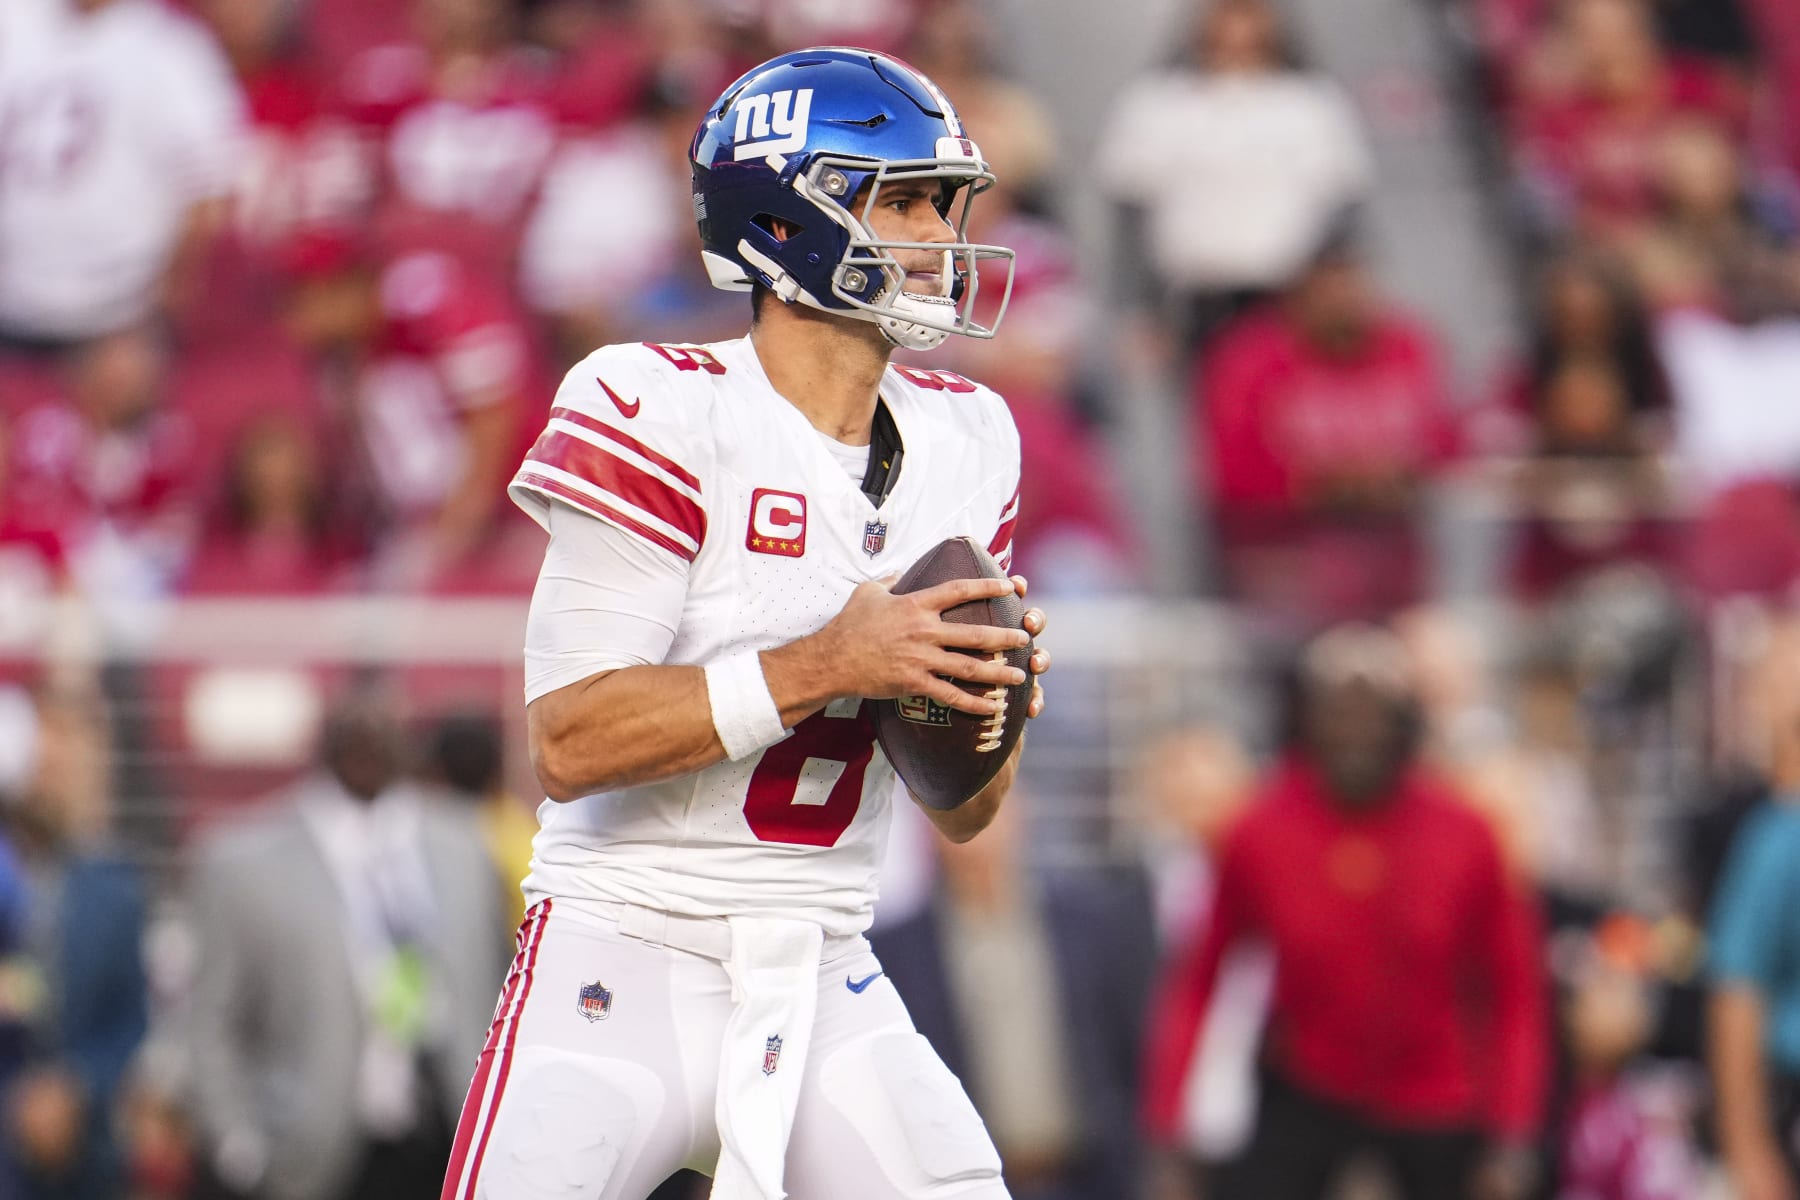 Where to watch Seahawks at Giants, ManningCast: details, time